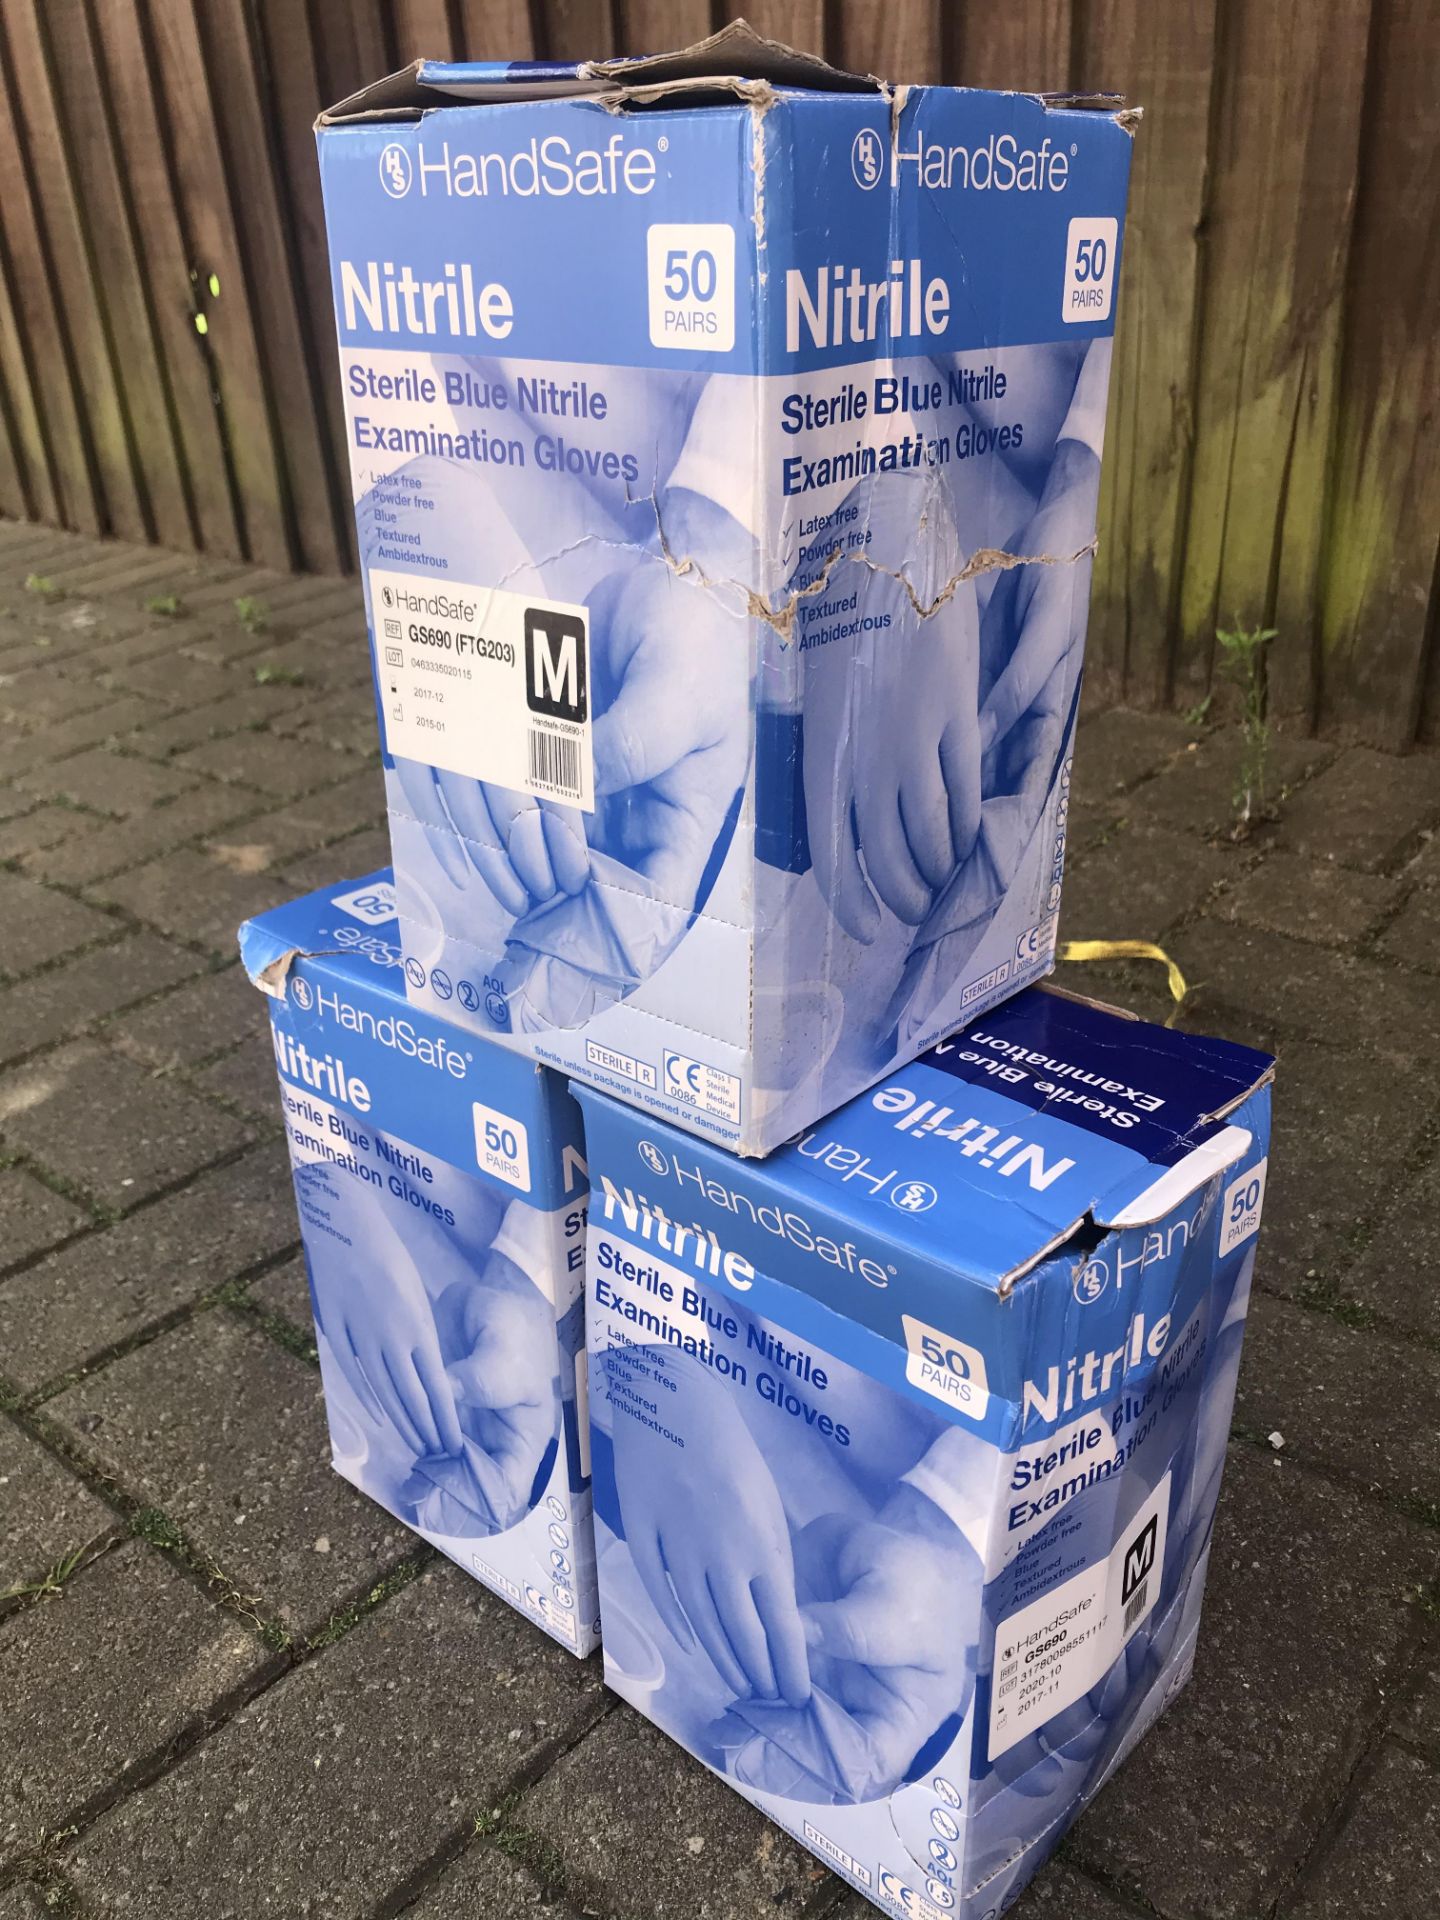 300 HANDSAFE NITRILE STERILE BLUE EXAMINATION GLOVES QTY: 3 CASES EACH CASE HAS 100 GLOVES PER BOX - Image 2 of 4